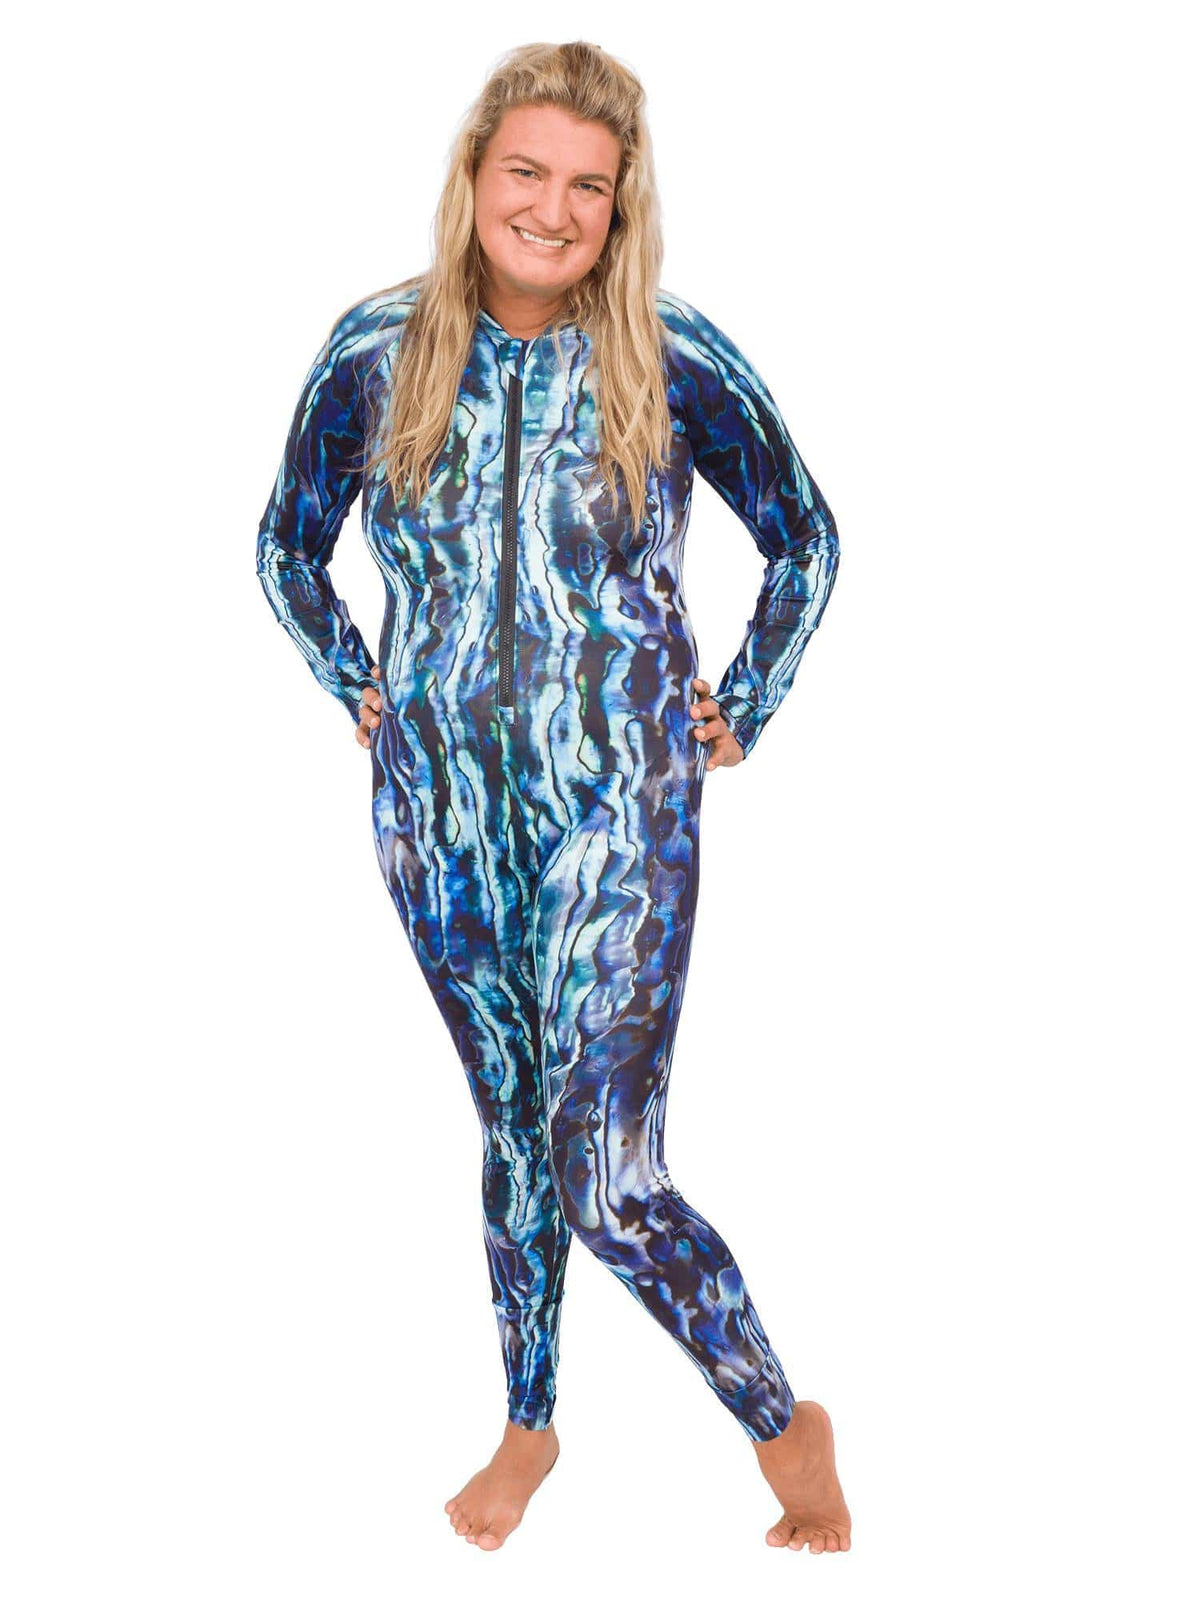 Model: Hannah is a sea turtle ambassador for Sea Turtle Adventures. She is wearing a size L.